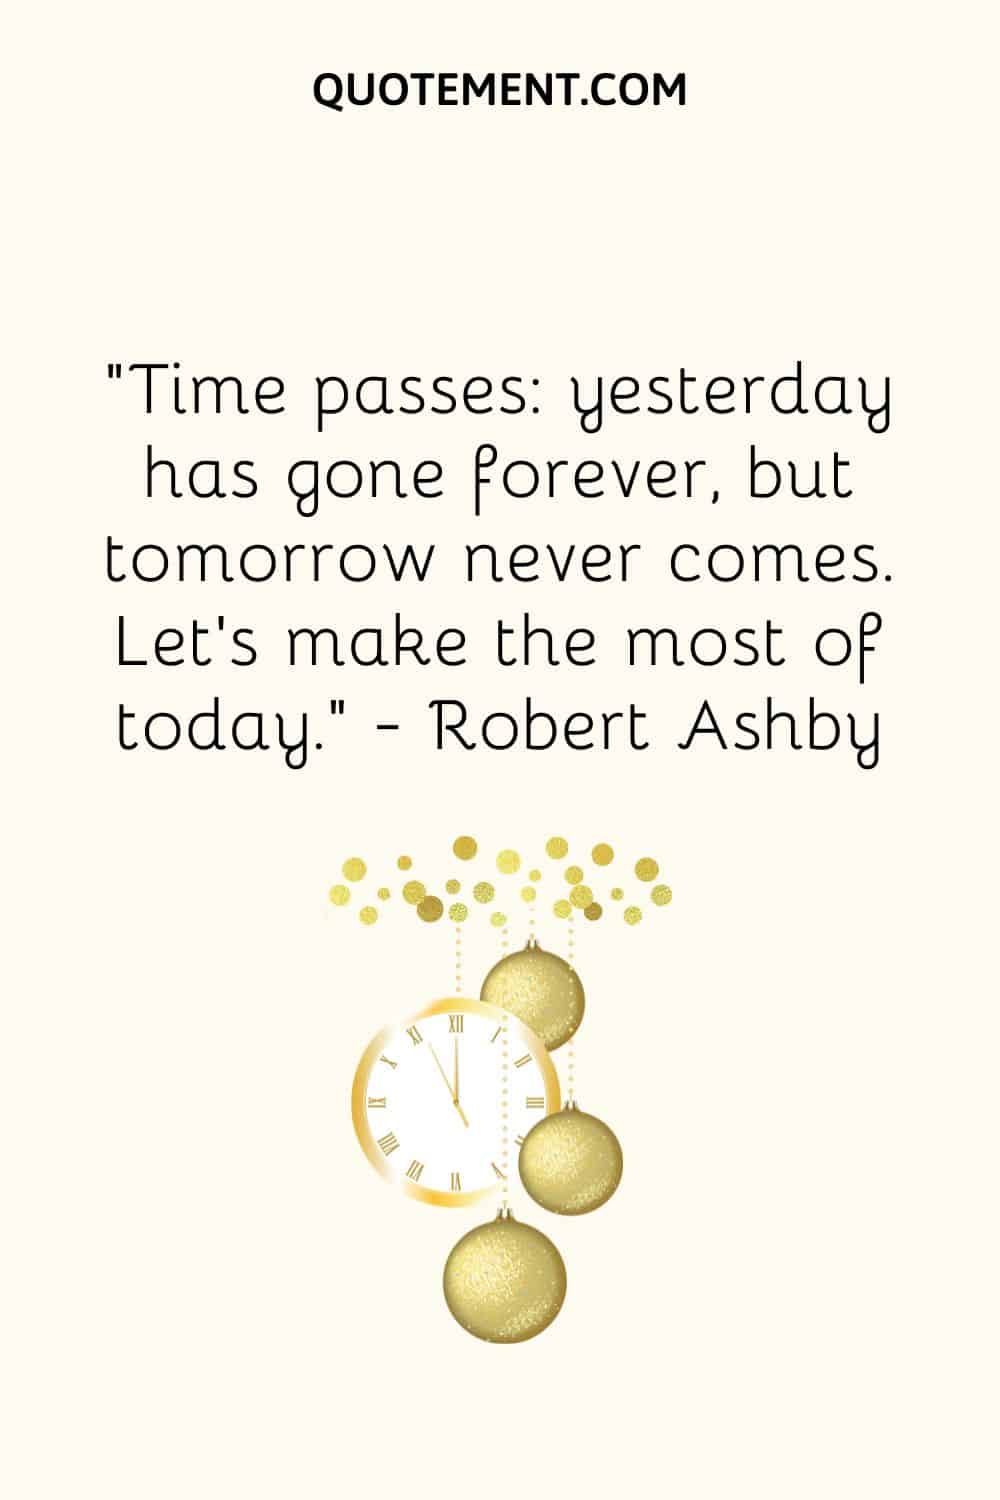 “Time passes yesterday has gone forever, but tomorrow never comes. Let’s make the most of today.” ― Robert Ashby